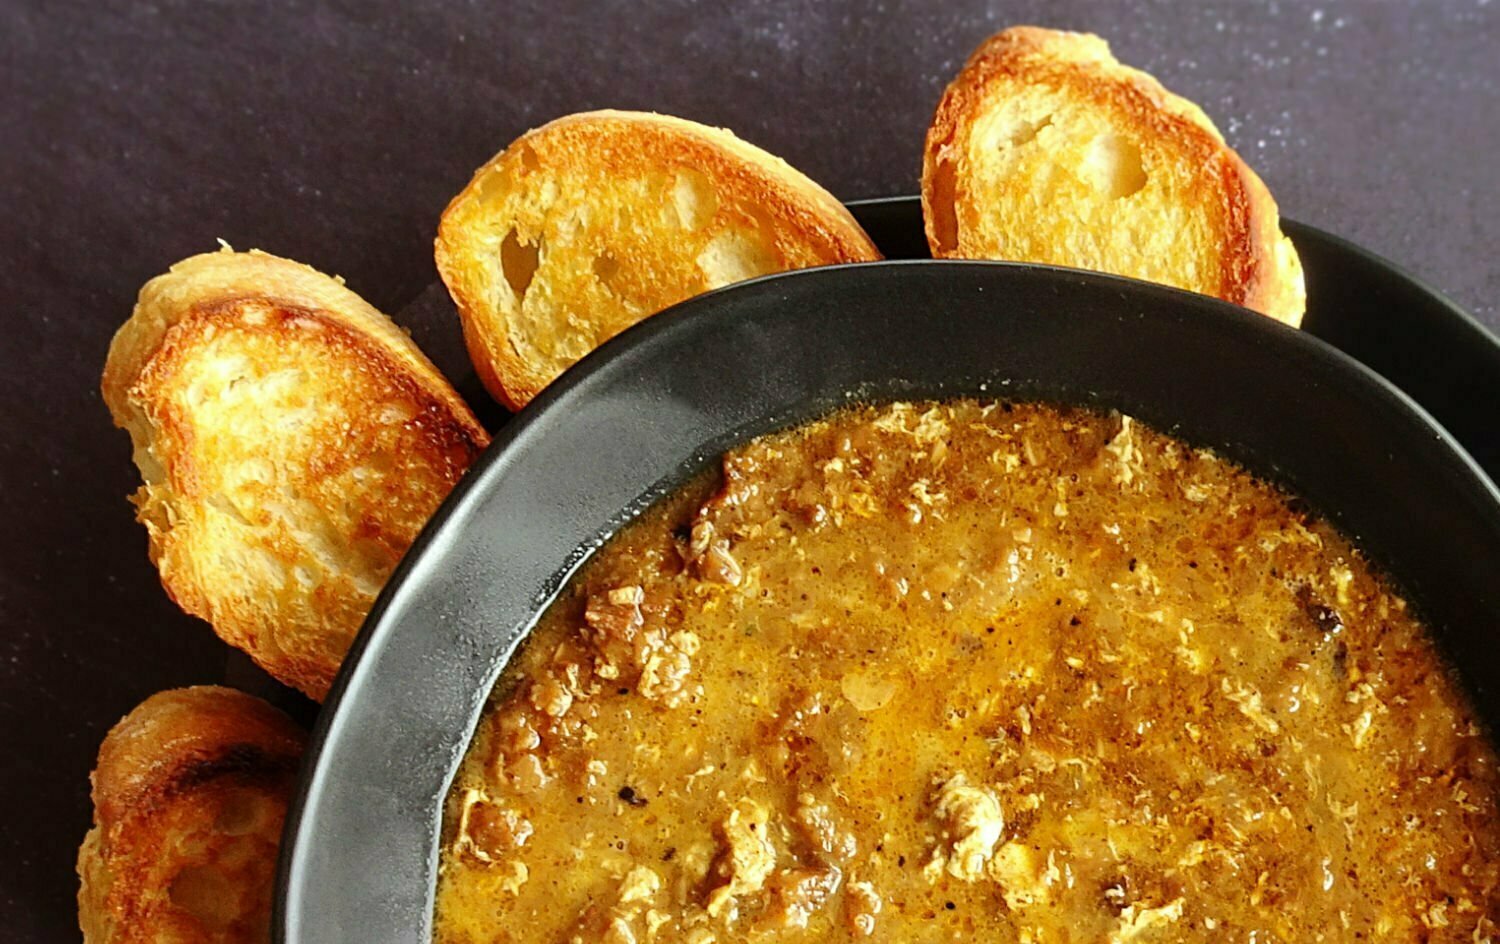 garlic soup sits in a black bowl beside some toasted bread. 